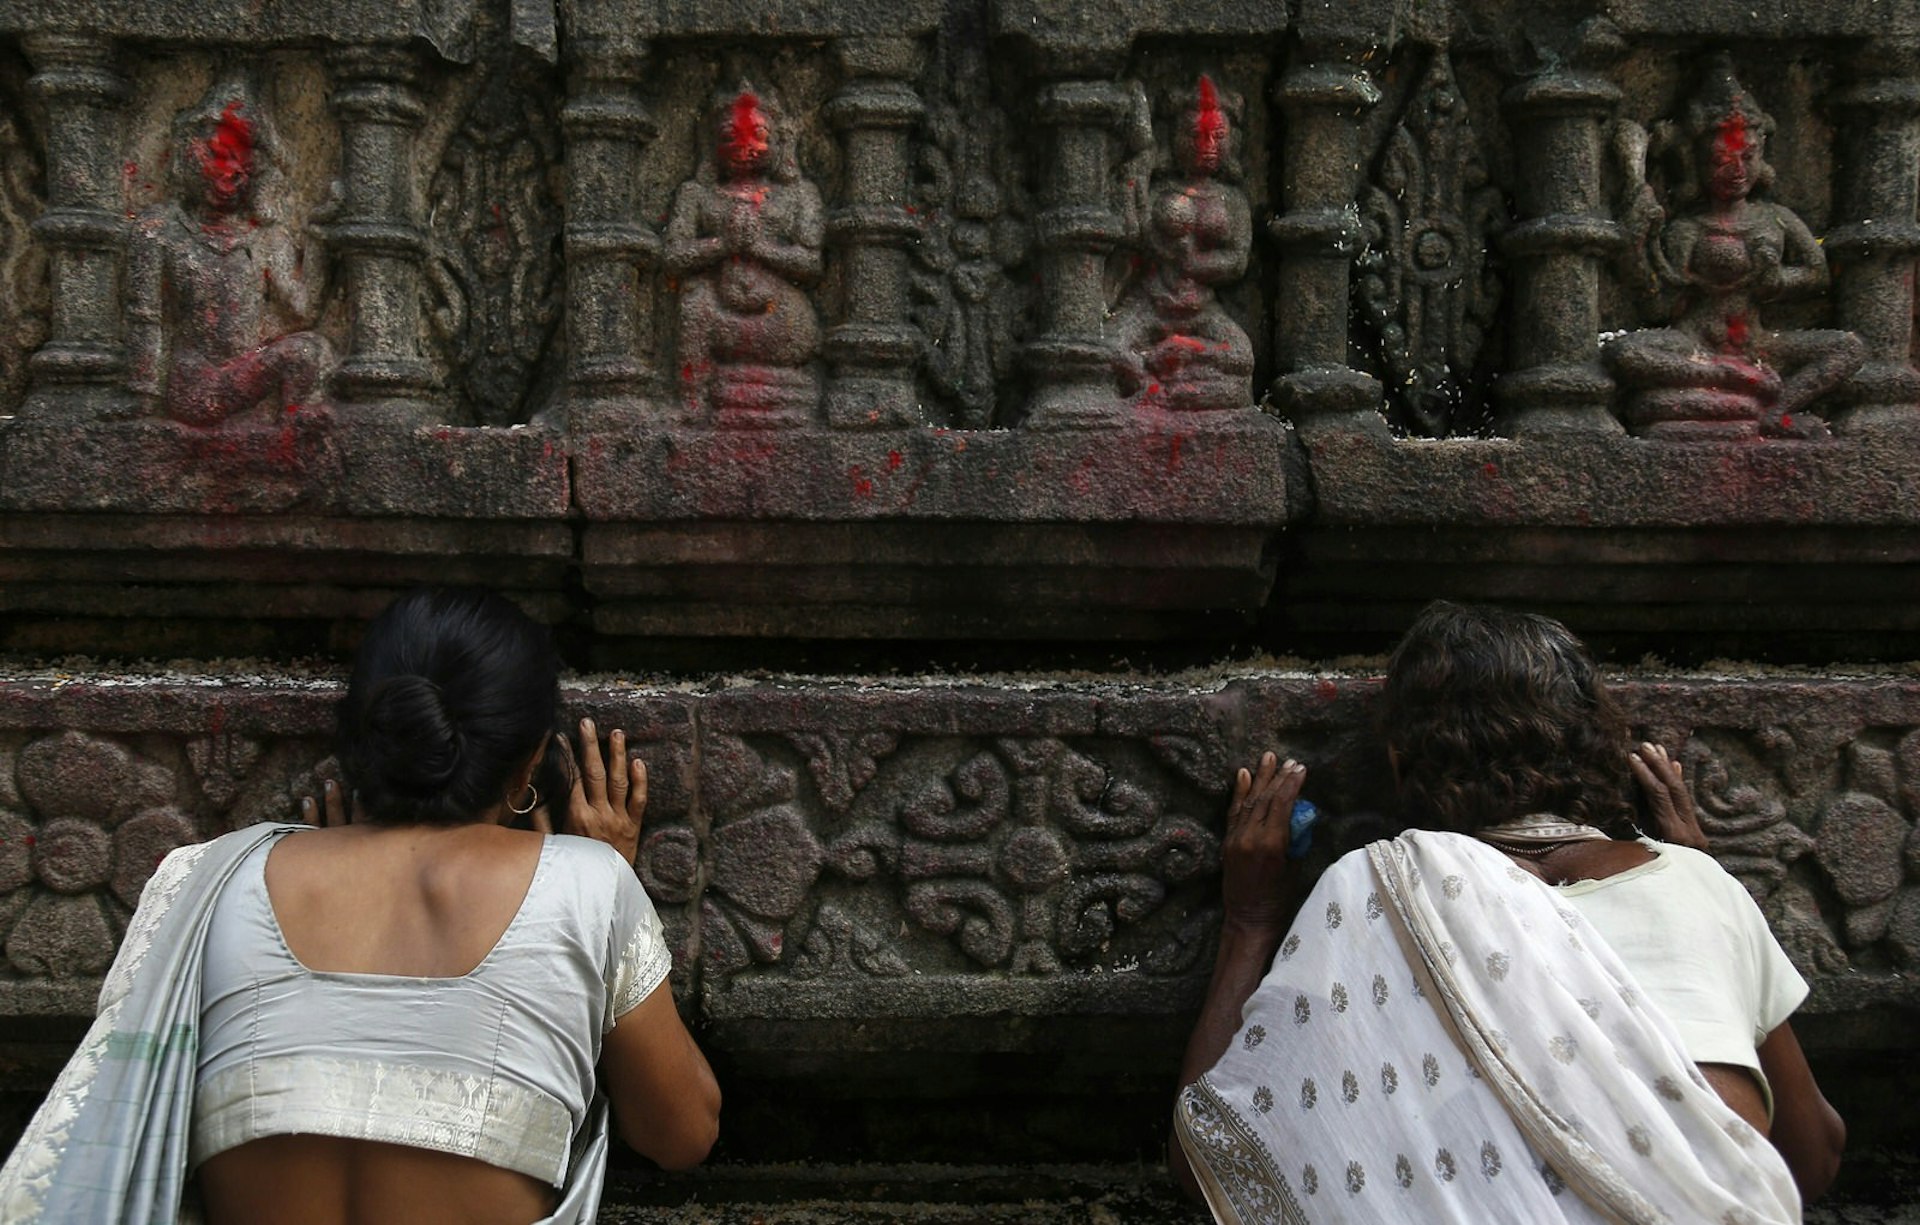 Indian women perform rituals during the Ambubachi festival at Kamakhya temple in Guwahati on June 24, 2014. Thousands of devotees from all over India gather on occasion of Ambubachi Mela, which is celebrated to mark the menstruation period of the presiding goddess of the temple, Devi Kamakhya, the Mother Shakti and during which occasion the sanctorum of the shrine remains closed to worshippers. AFP PHOTO/ ANUWAR HAZARIKA (Photo credit should read ANUWAR HAZARIKA/AFP/Getty Images)